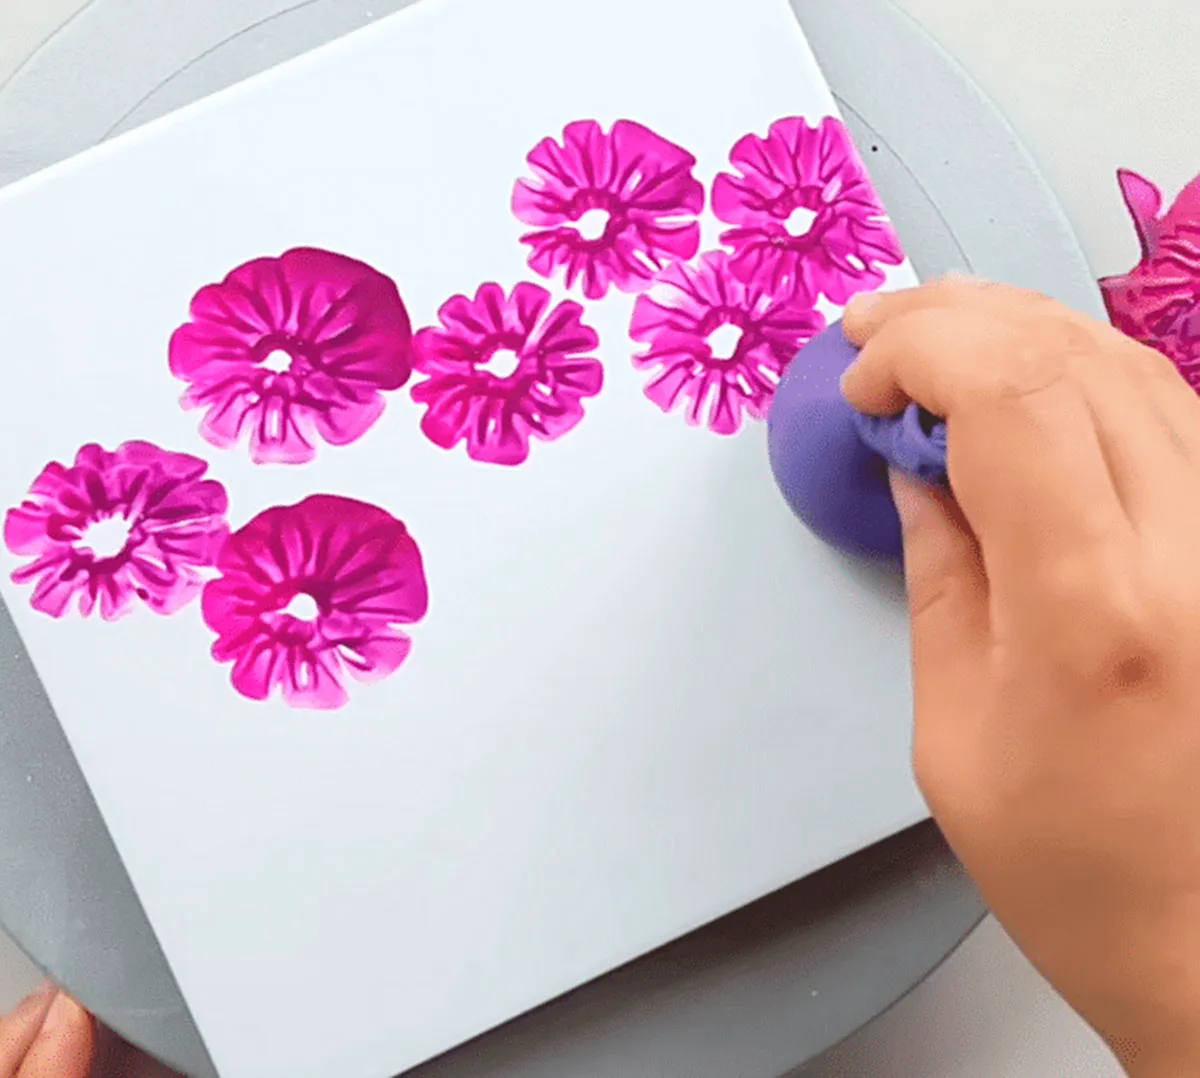 How to paint flowers with a balloon